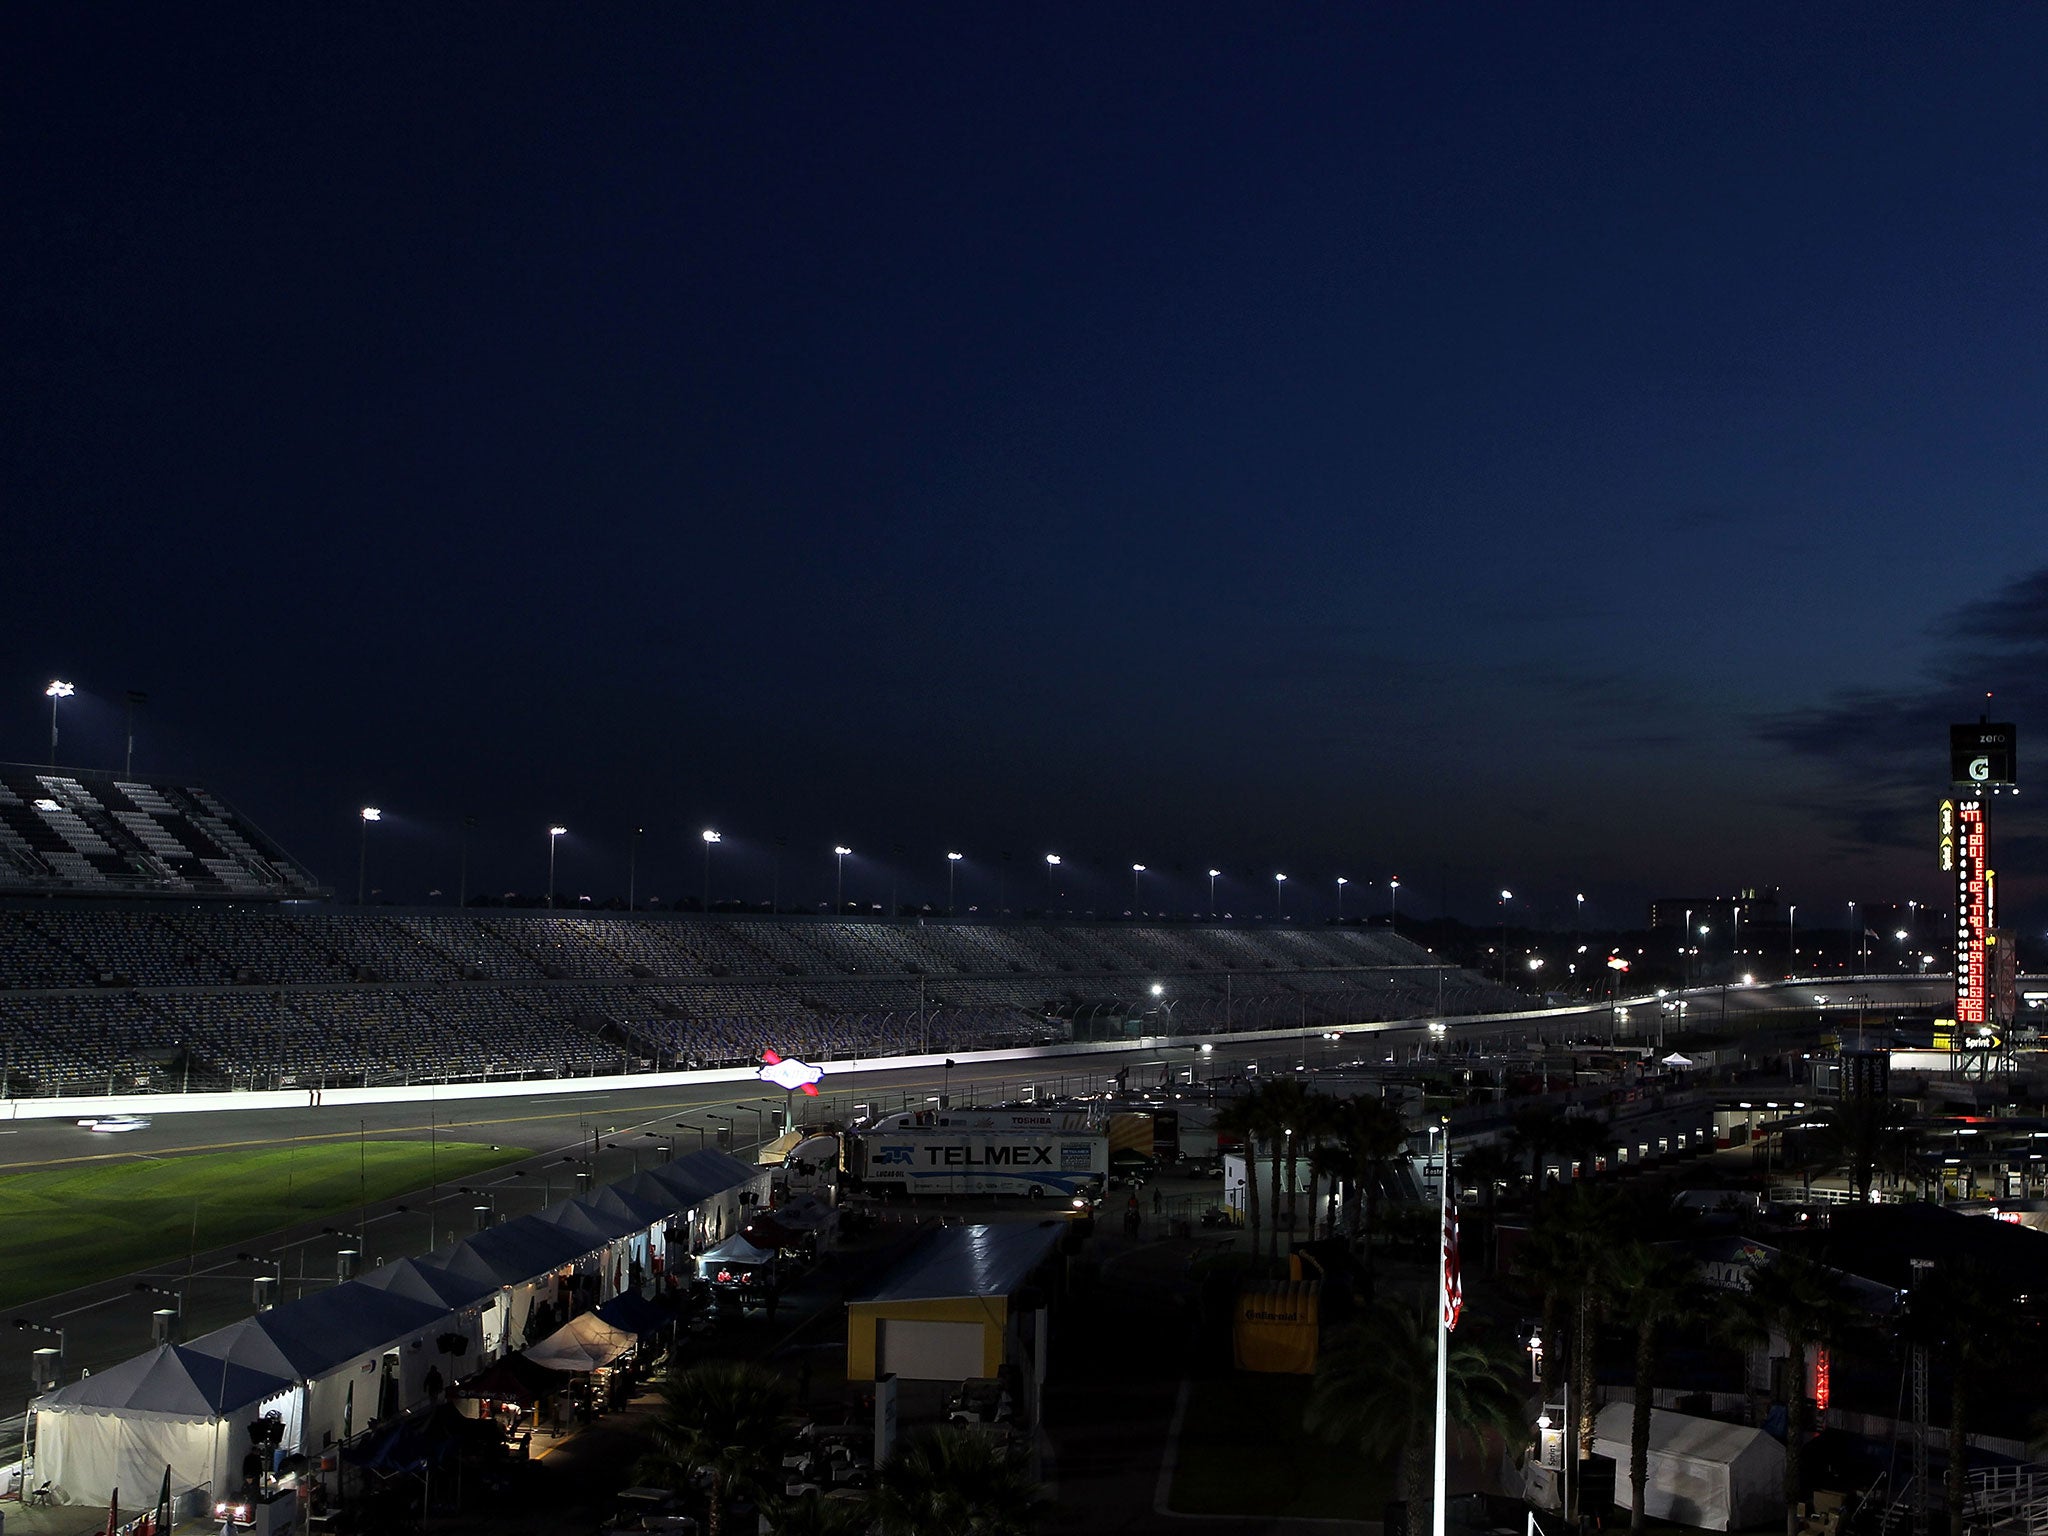 Drivers will race through the night on the Daytona International Speedway road course